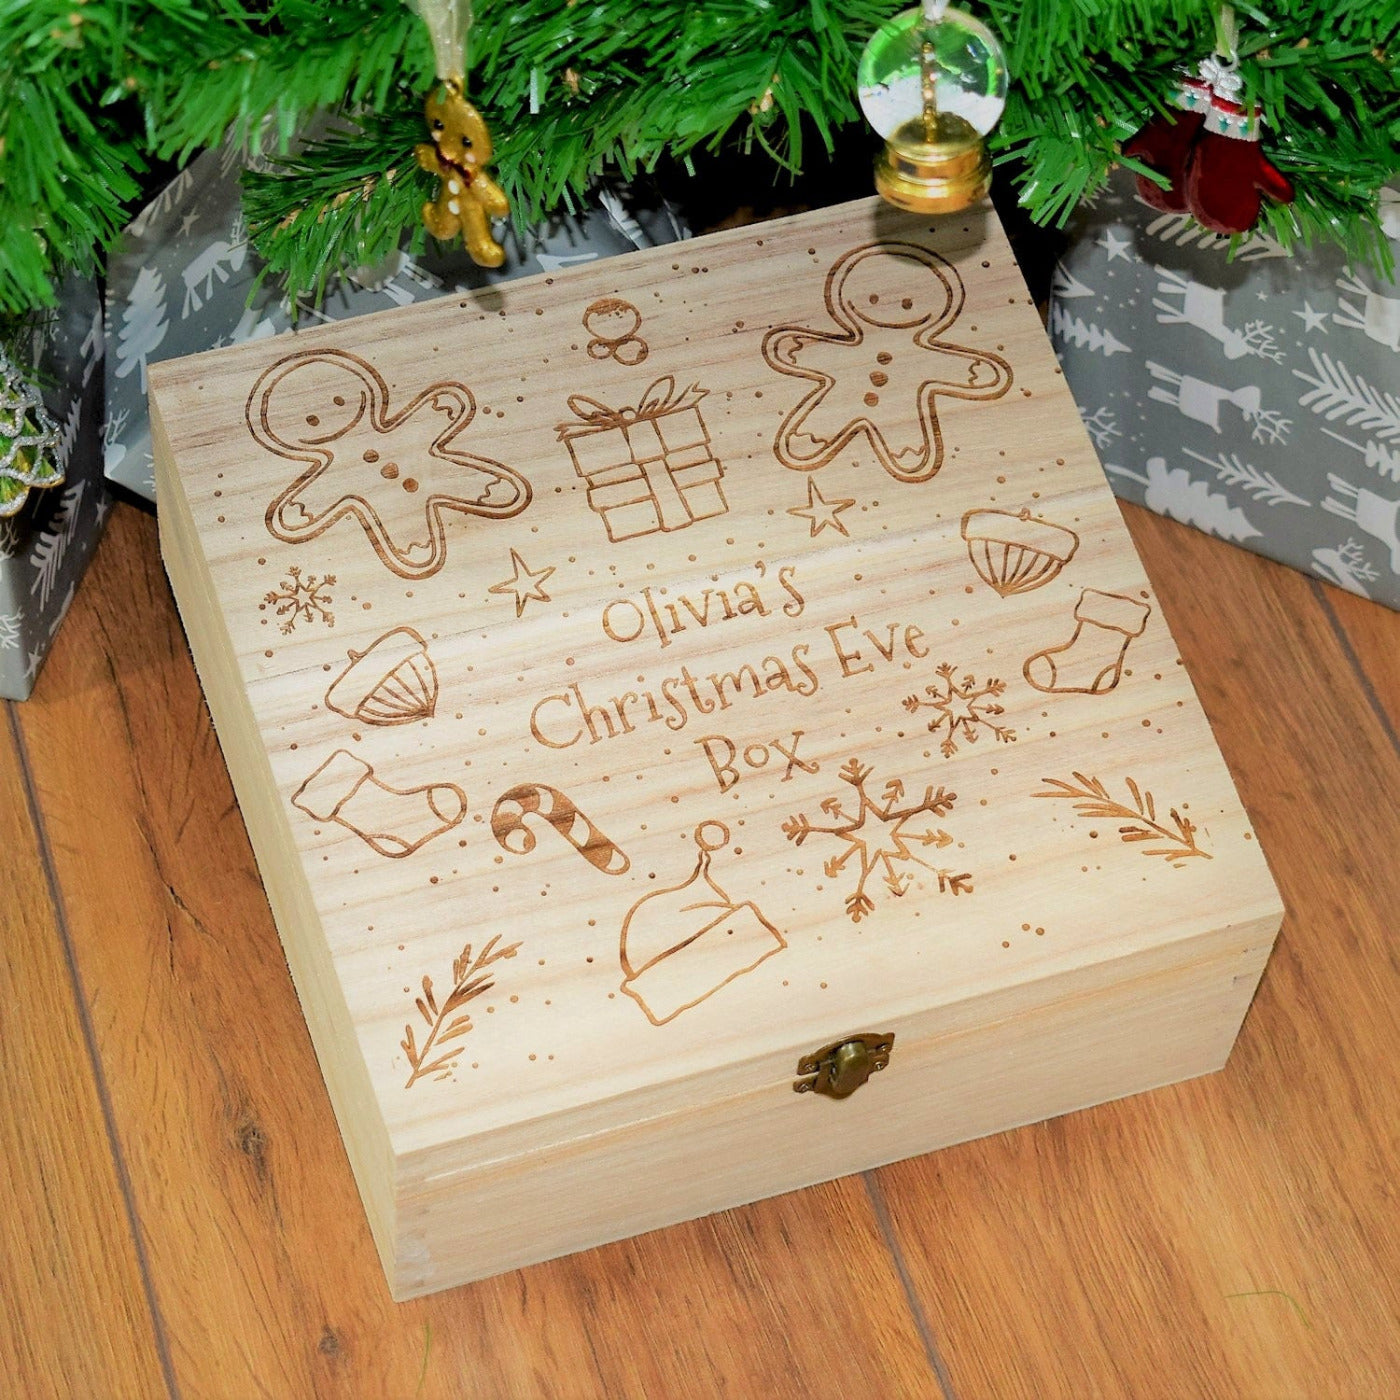 Personalised, Engraved Wooden Christmas Eve Box - Gingerbread Men